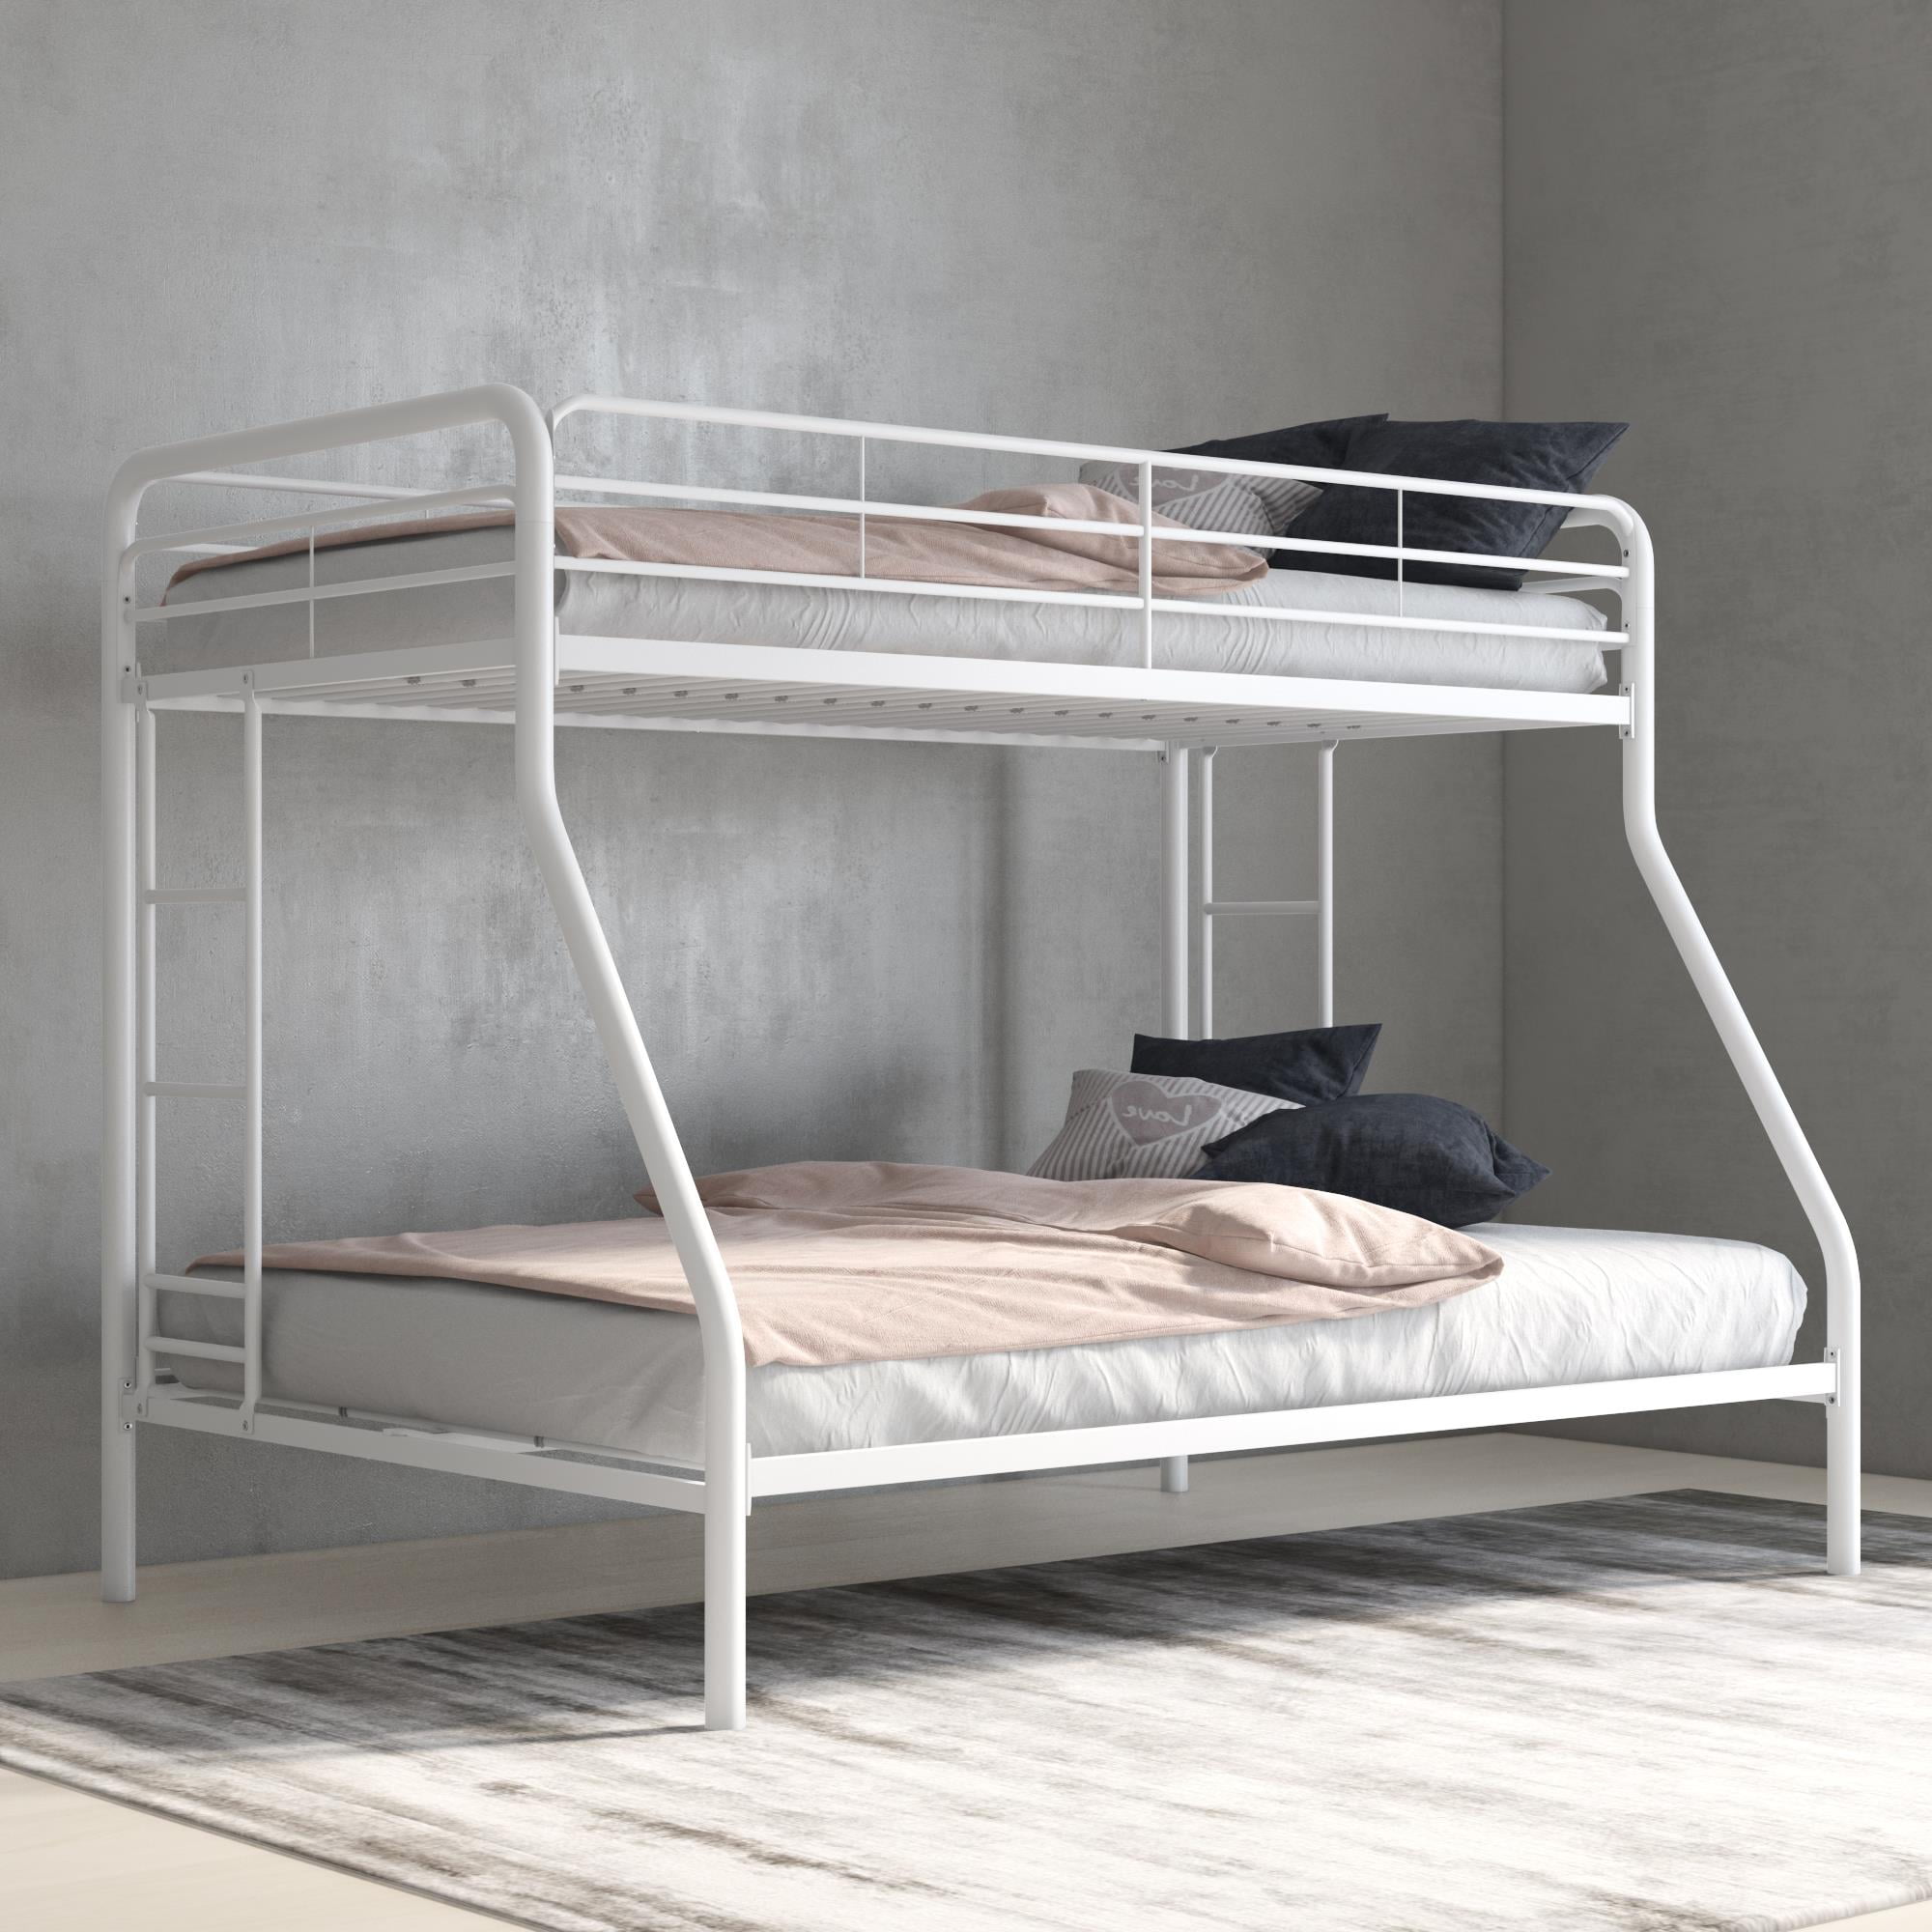 Dhp Twin Over Full Metal Bunk Bed Frame, Mainstays Premium Twin Over Full Bunk Bed Blueprints